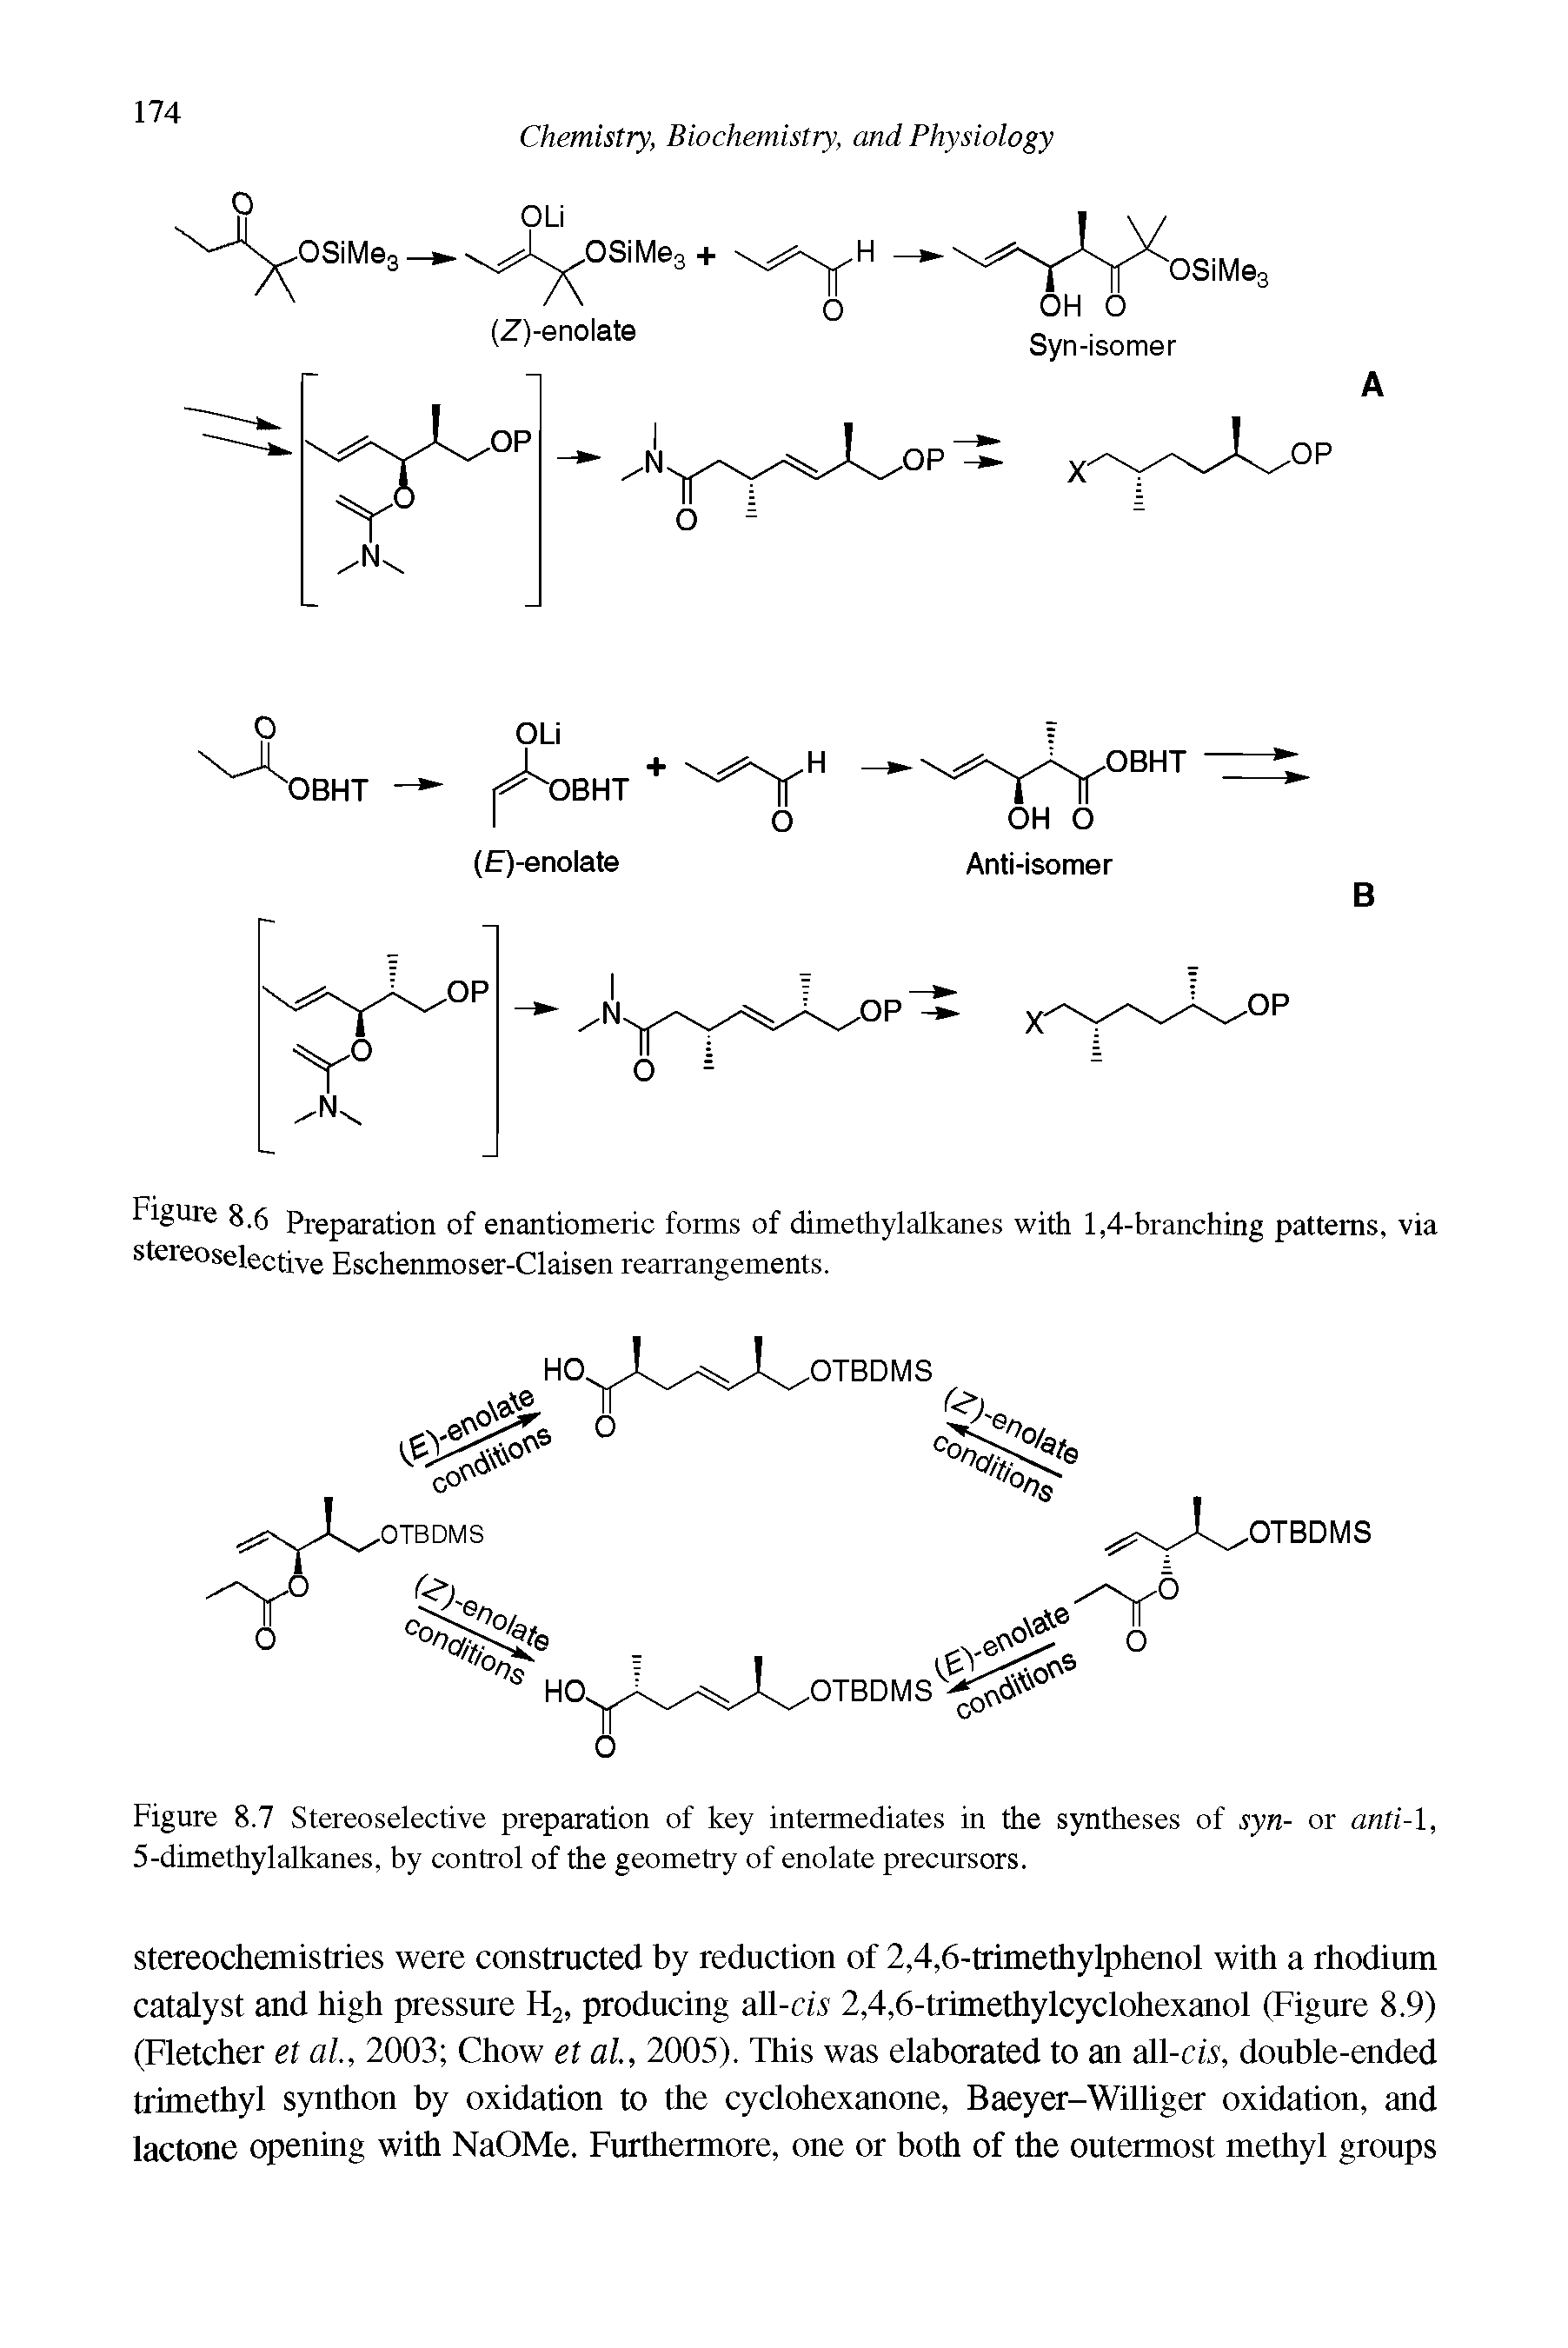 Figure 8.6 Preparation of enantiomeric forms of dimethylalkanes with 1,4-branching patterns, via stereoselective Eschenmoser-Claisen rearrangements.